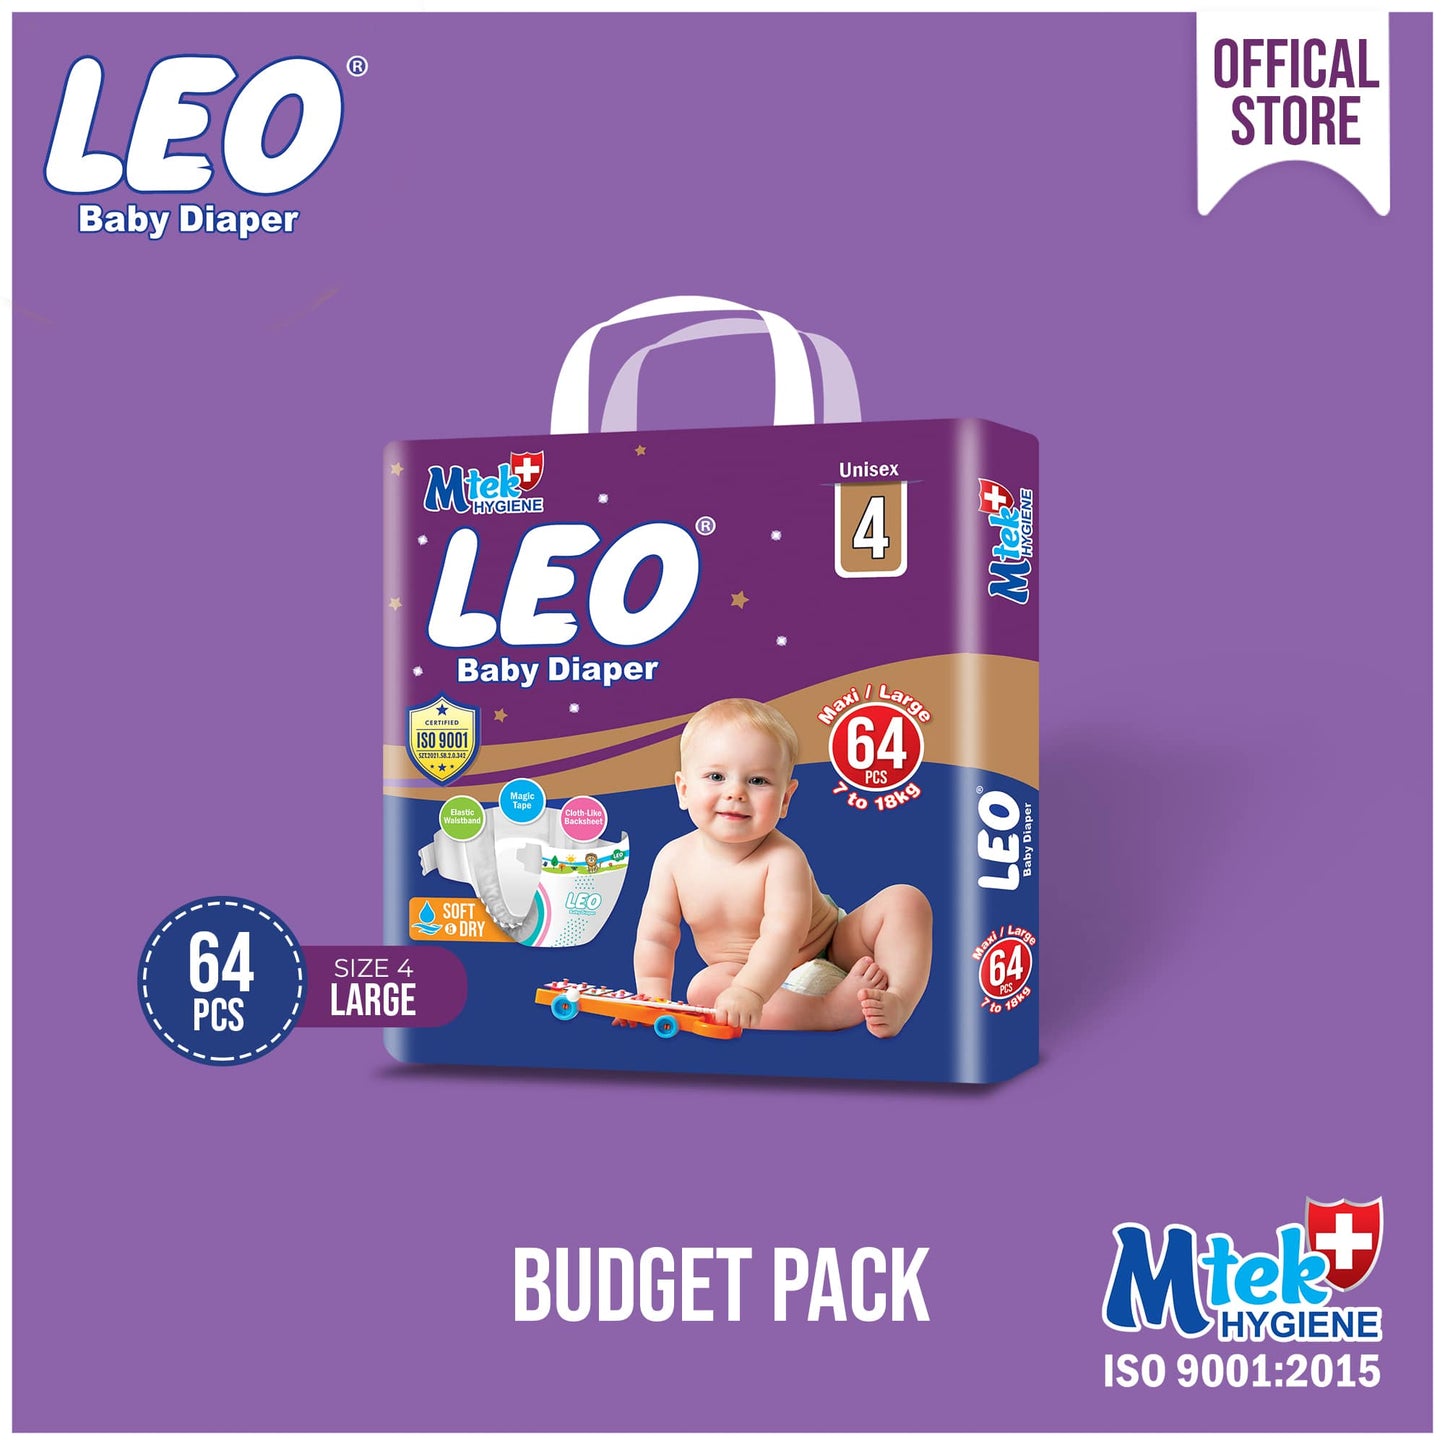 Leo Budget Pack Baby Diaper – Size 4, Large – 64 Pcs